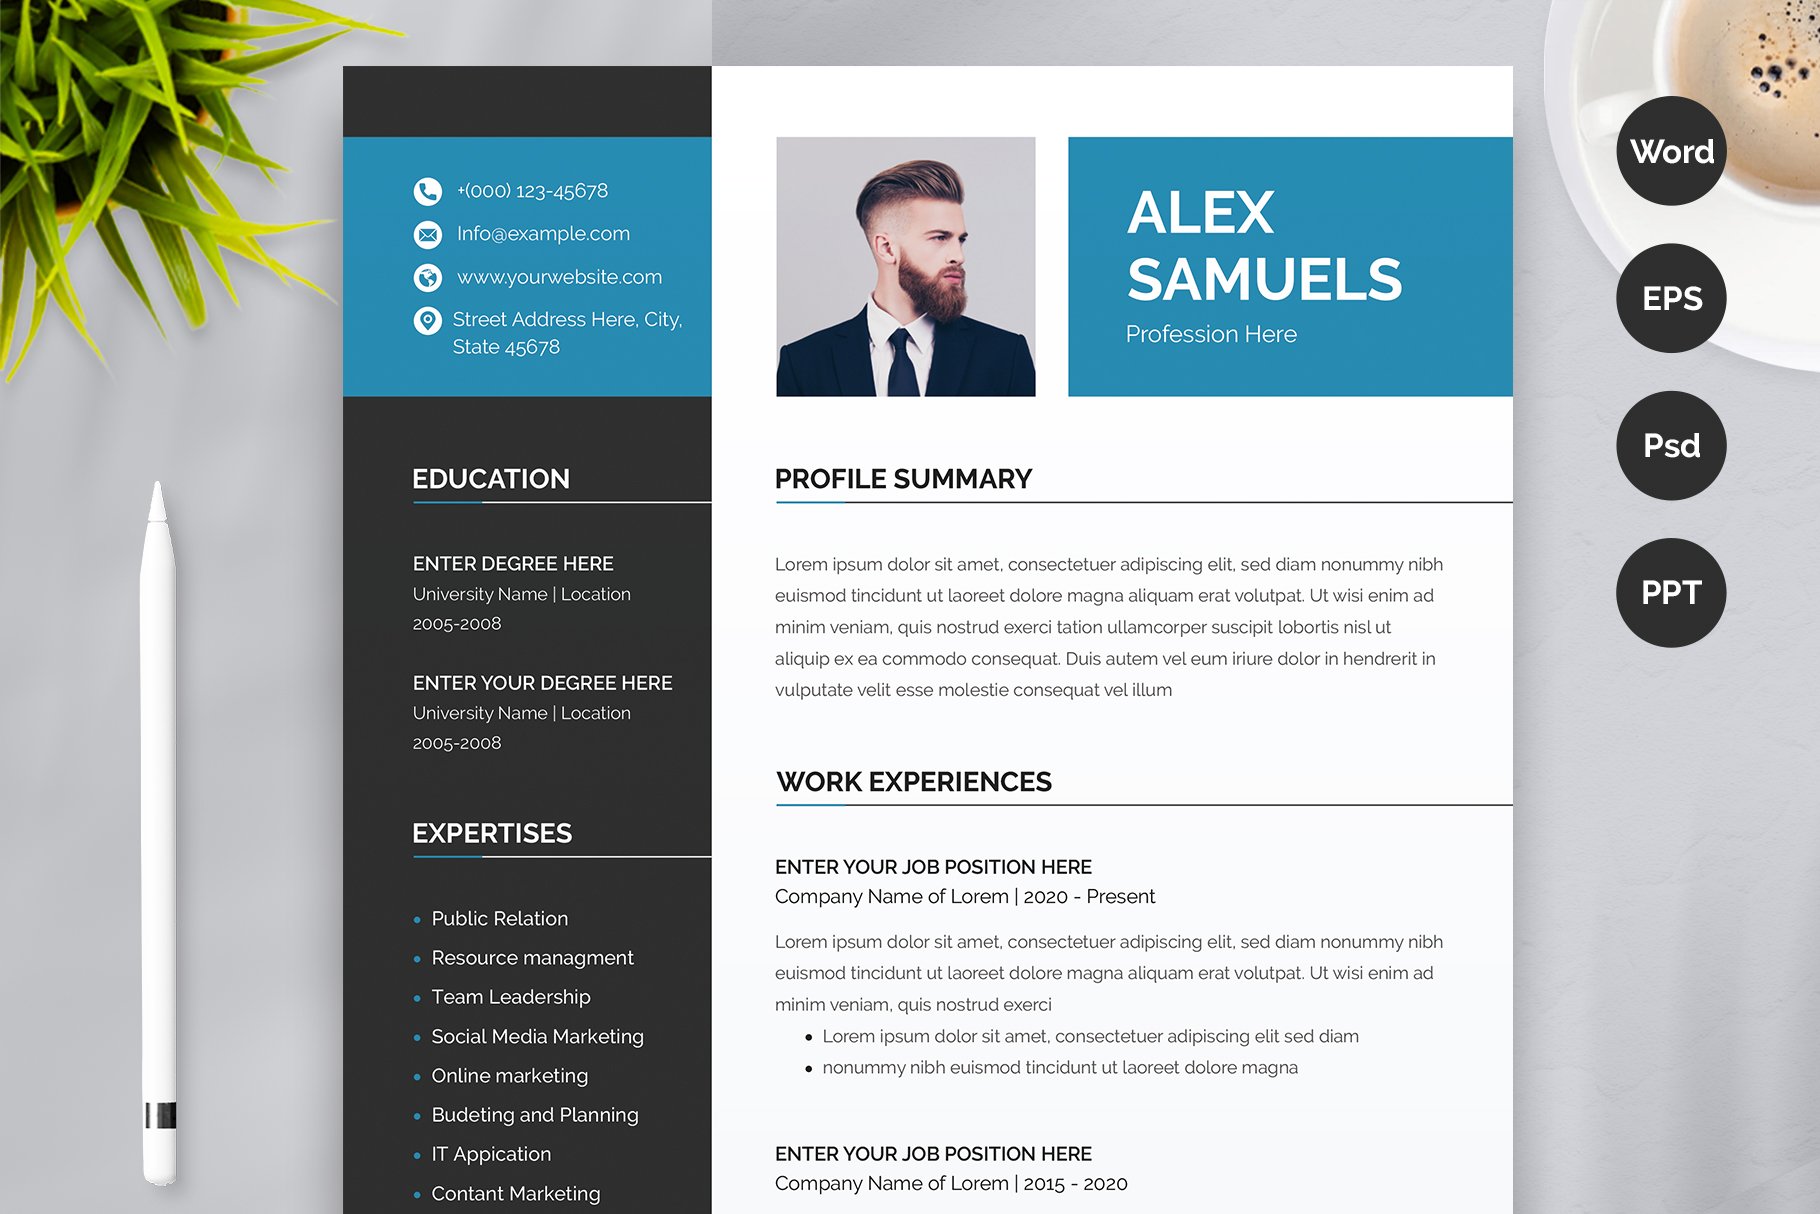 Professional Word Resume CV cover image.